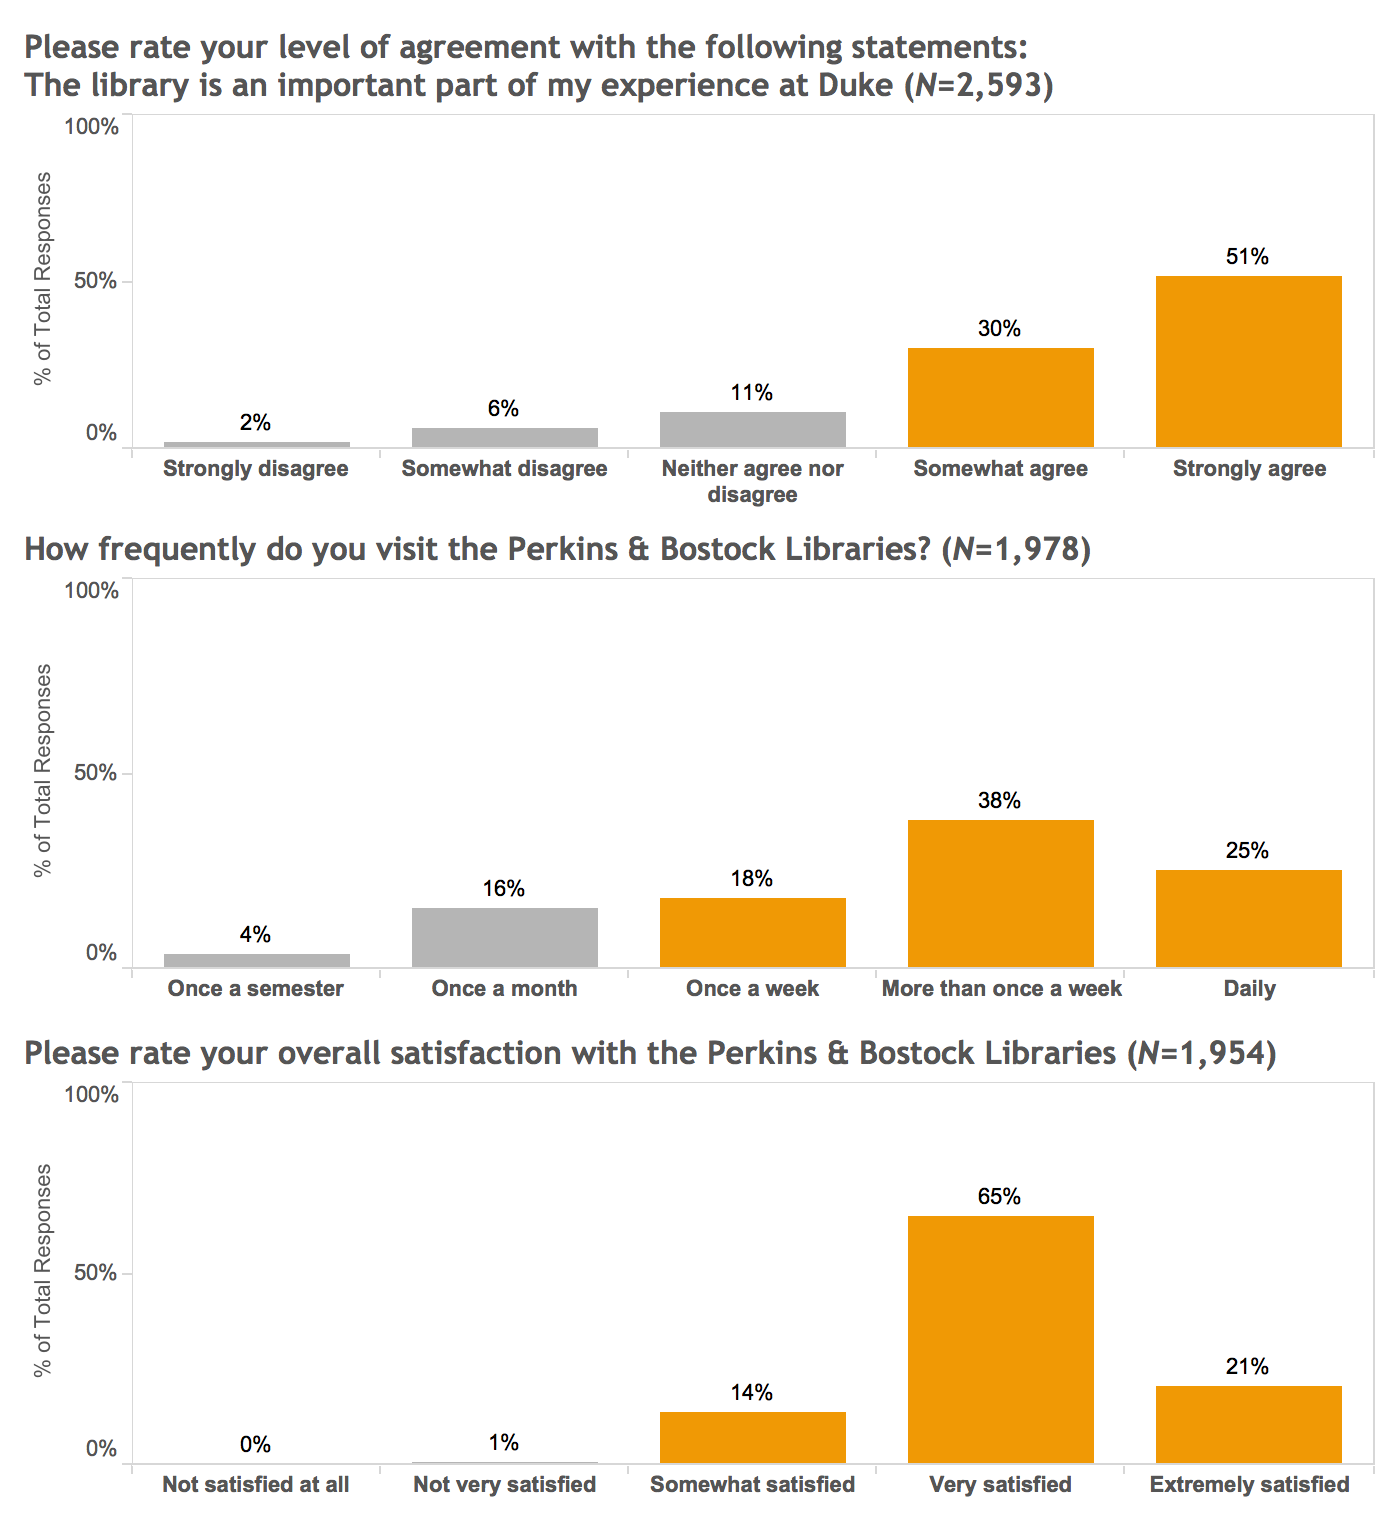 Three related bar charts. The first bar chart shows responses to a question asking students to agree that the library is an important part of their experience. 30% of students selected "somewhat agree," and 51% selected "strongly agree." A second chart shows that, for the Perkins & Bostock Libraries, 18% of students visit once a week, 38% visit more than once a week, and 25% visit daily. The third chart shows that for overall satisfaction with Perkins & Bostock, 14% are somewhat satisfied, 65% are very satisfied, and 21% are extremely satisfied.